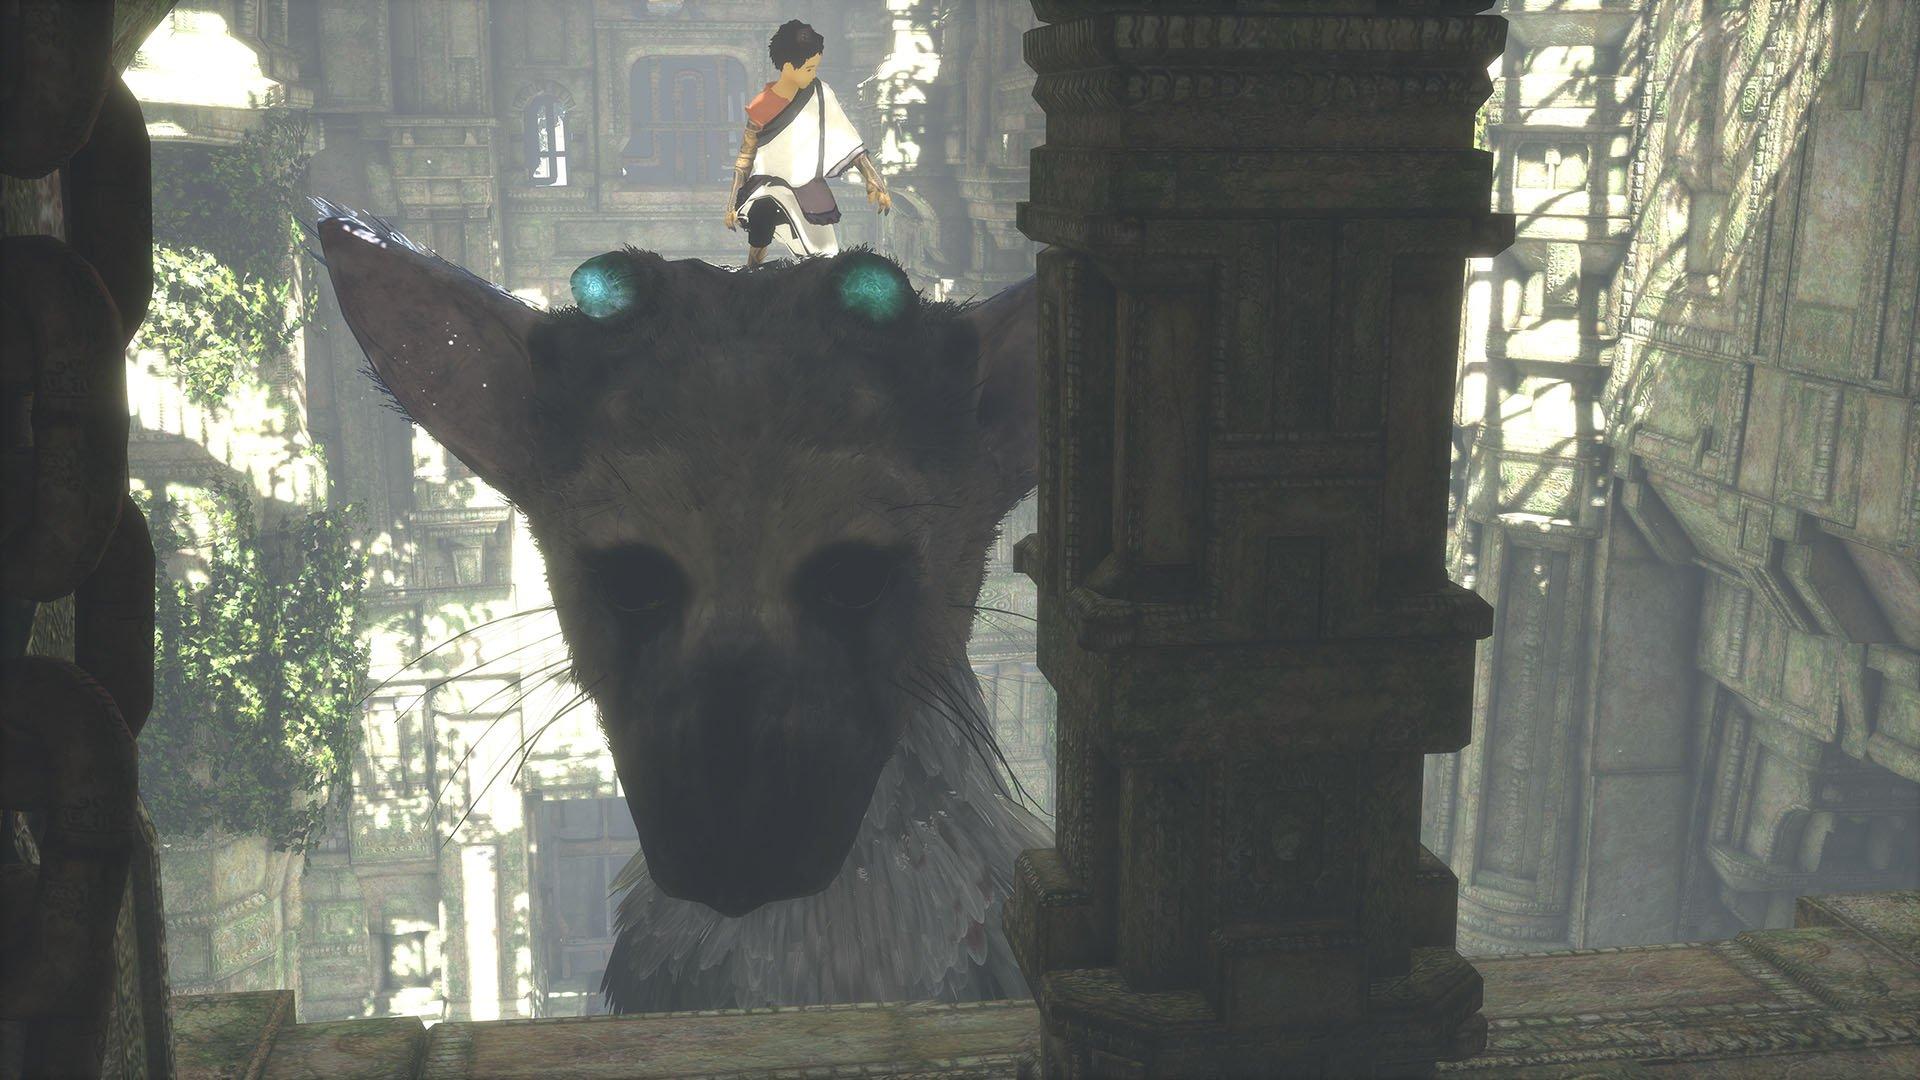 Last Guardian: Collector's Edition (Sony PlayStation 4, 2016) for sale  online